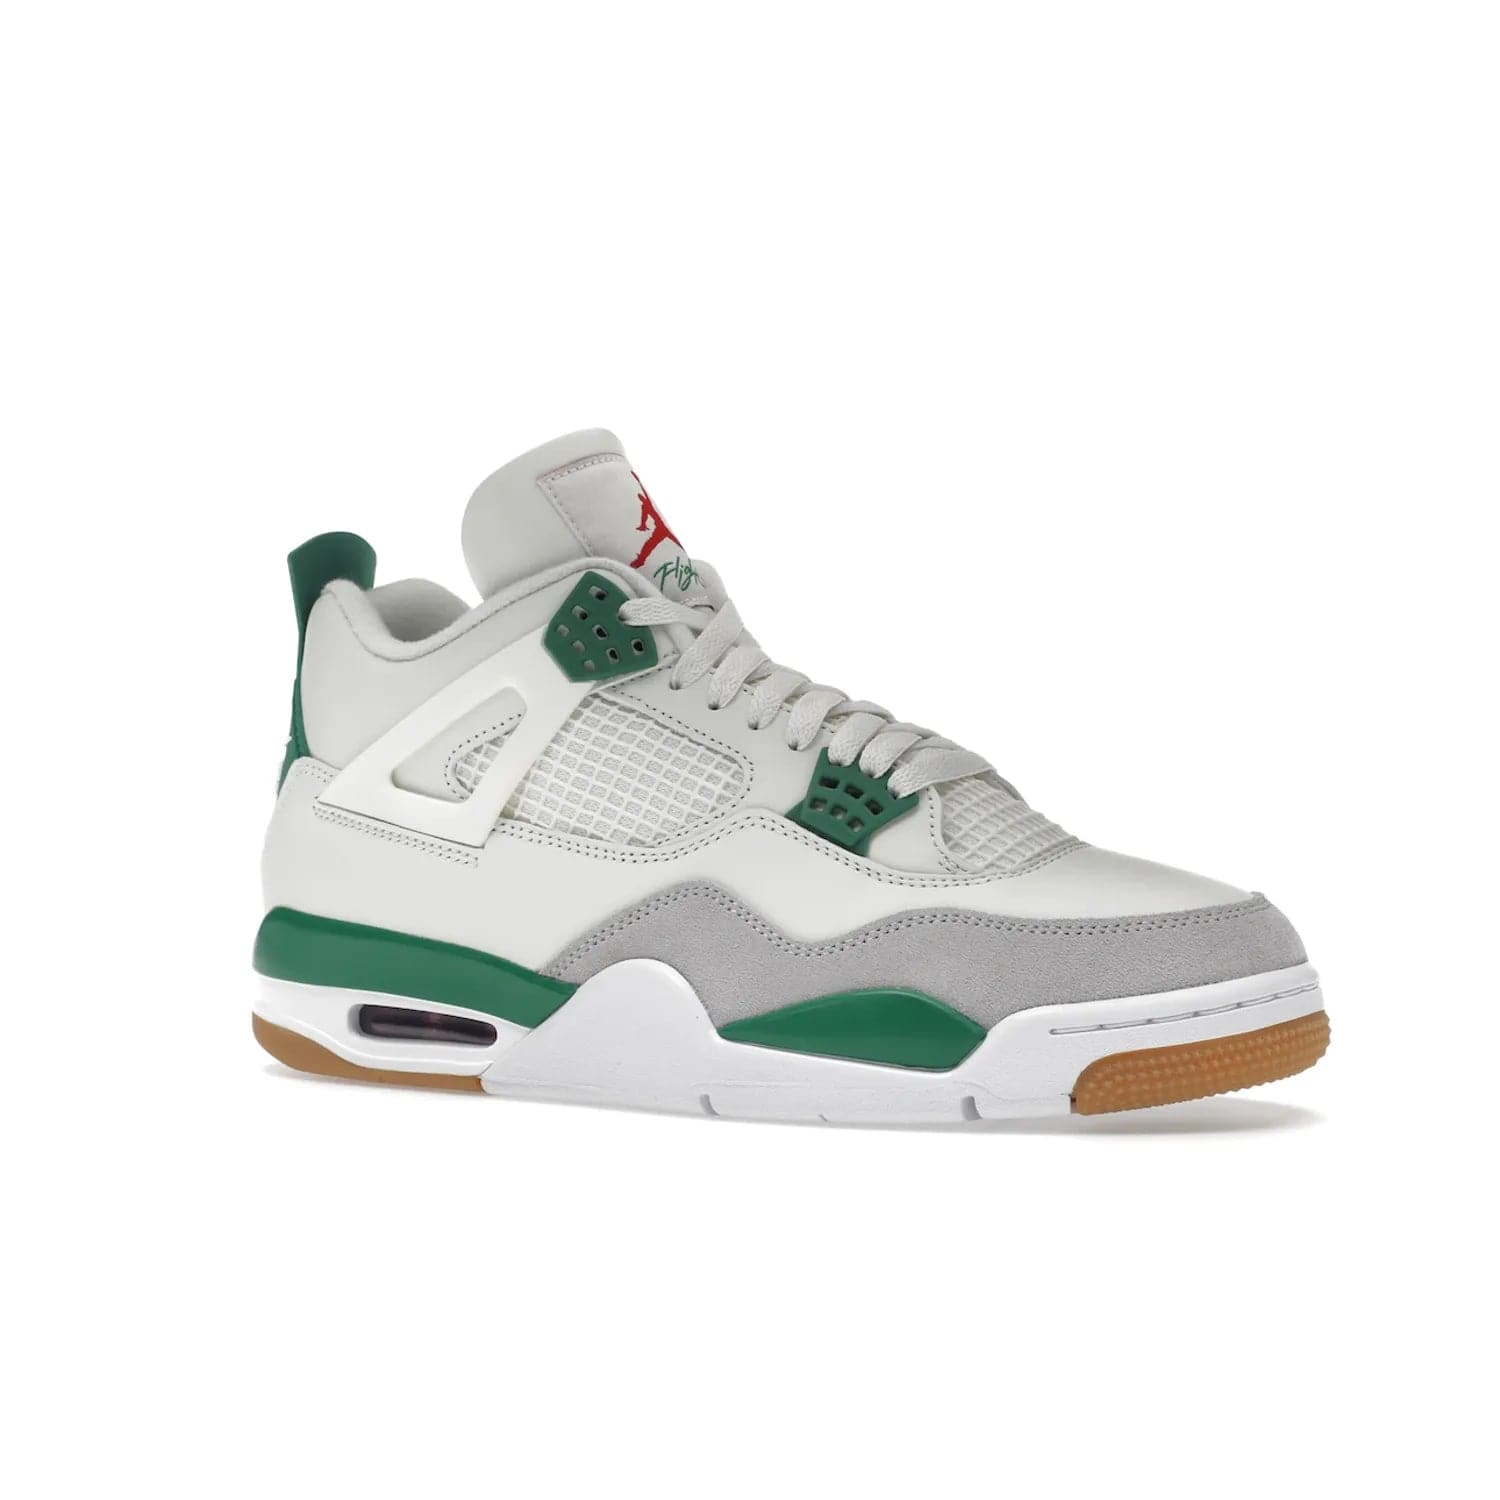 Jordan 4 Retro SB Pine Green - Image 4 - Only at www.BallersClubKickz.com - A white leather upper combined with a Neutral Grey suede mudguard gives this limited Air Jordan 4 Retro SB Pine Green sneaker its unmistakable style. Released March 20, 2023, the Jordan 4 Retro SB features a white and Pine Green midsole plus a red air unit with a gum outsole for grip. The perfect blend of Nike SB skateboarding and Jordan 4 classic design.